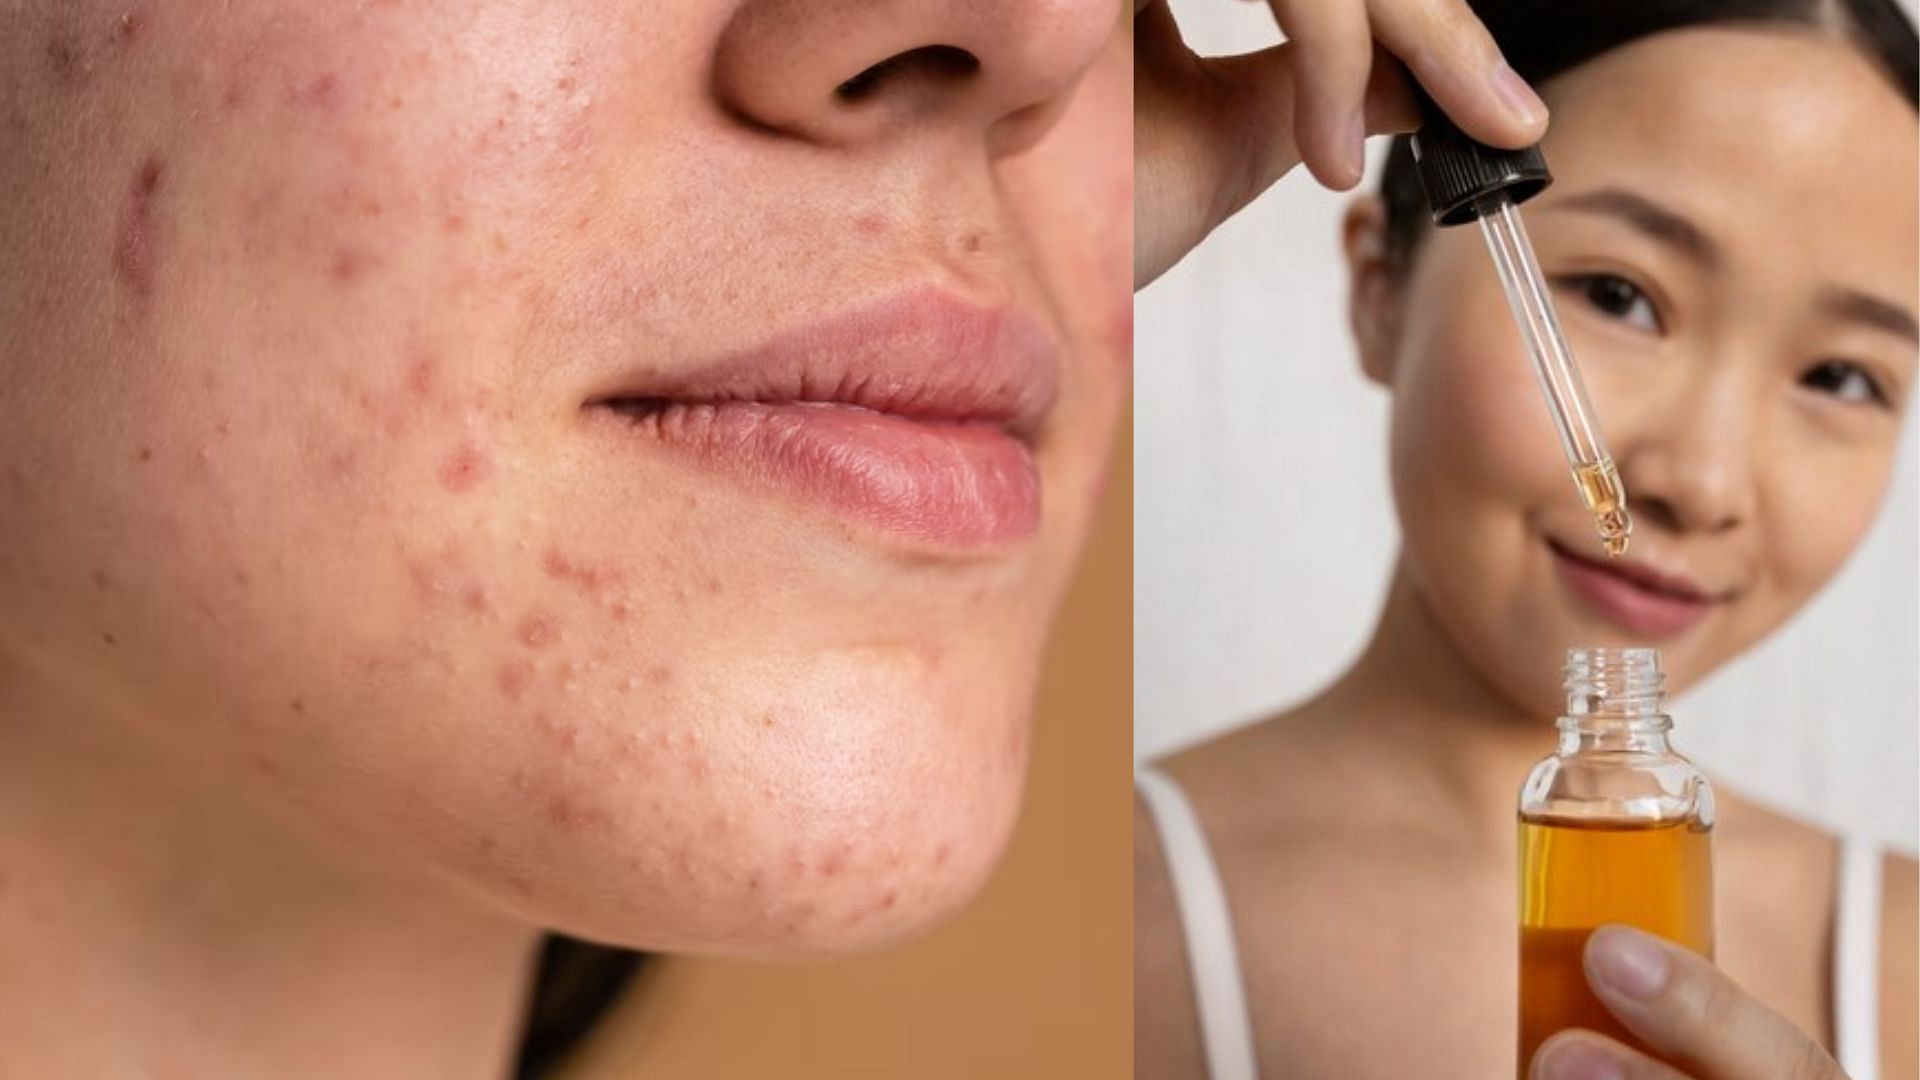 How to get rid of Chin Acne? Reasons, Treatment and more details explored